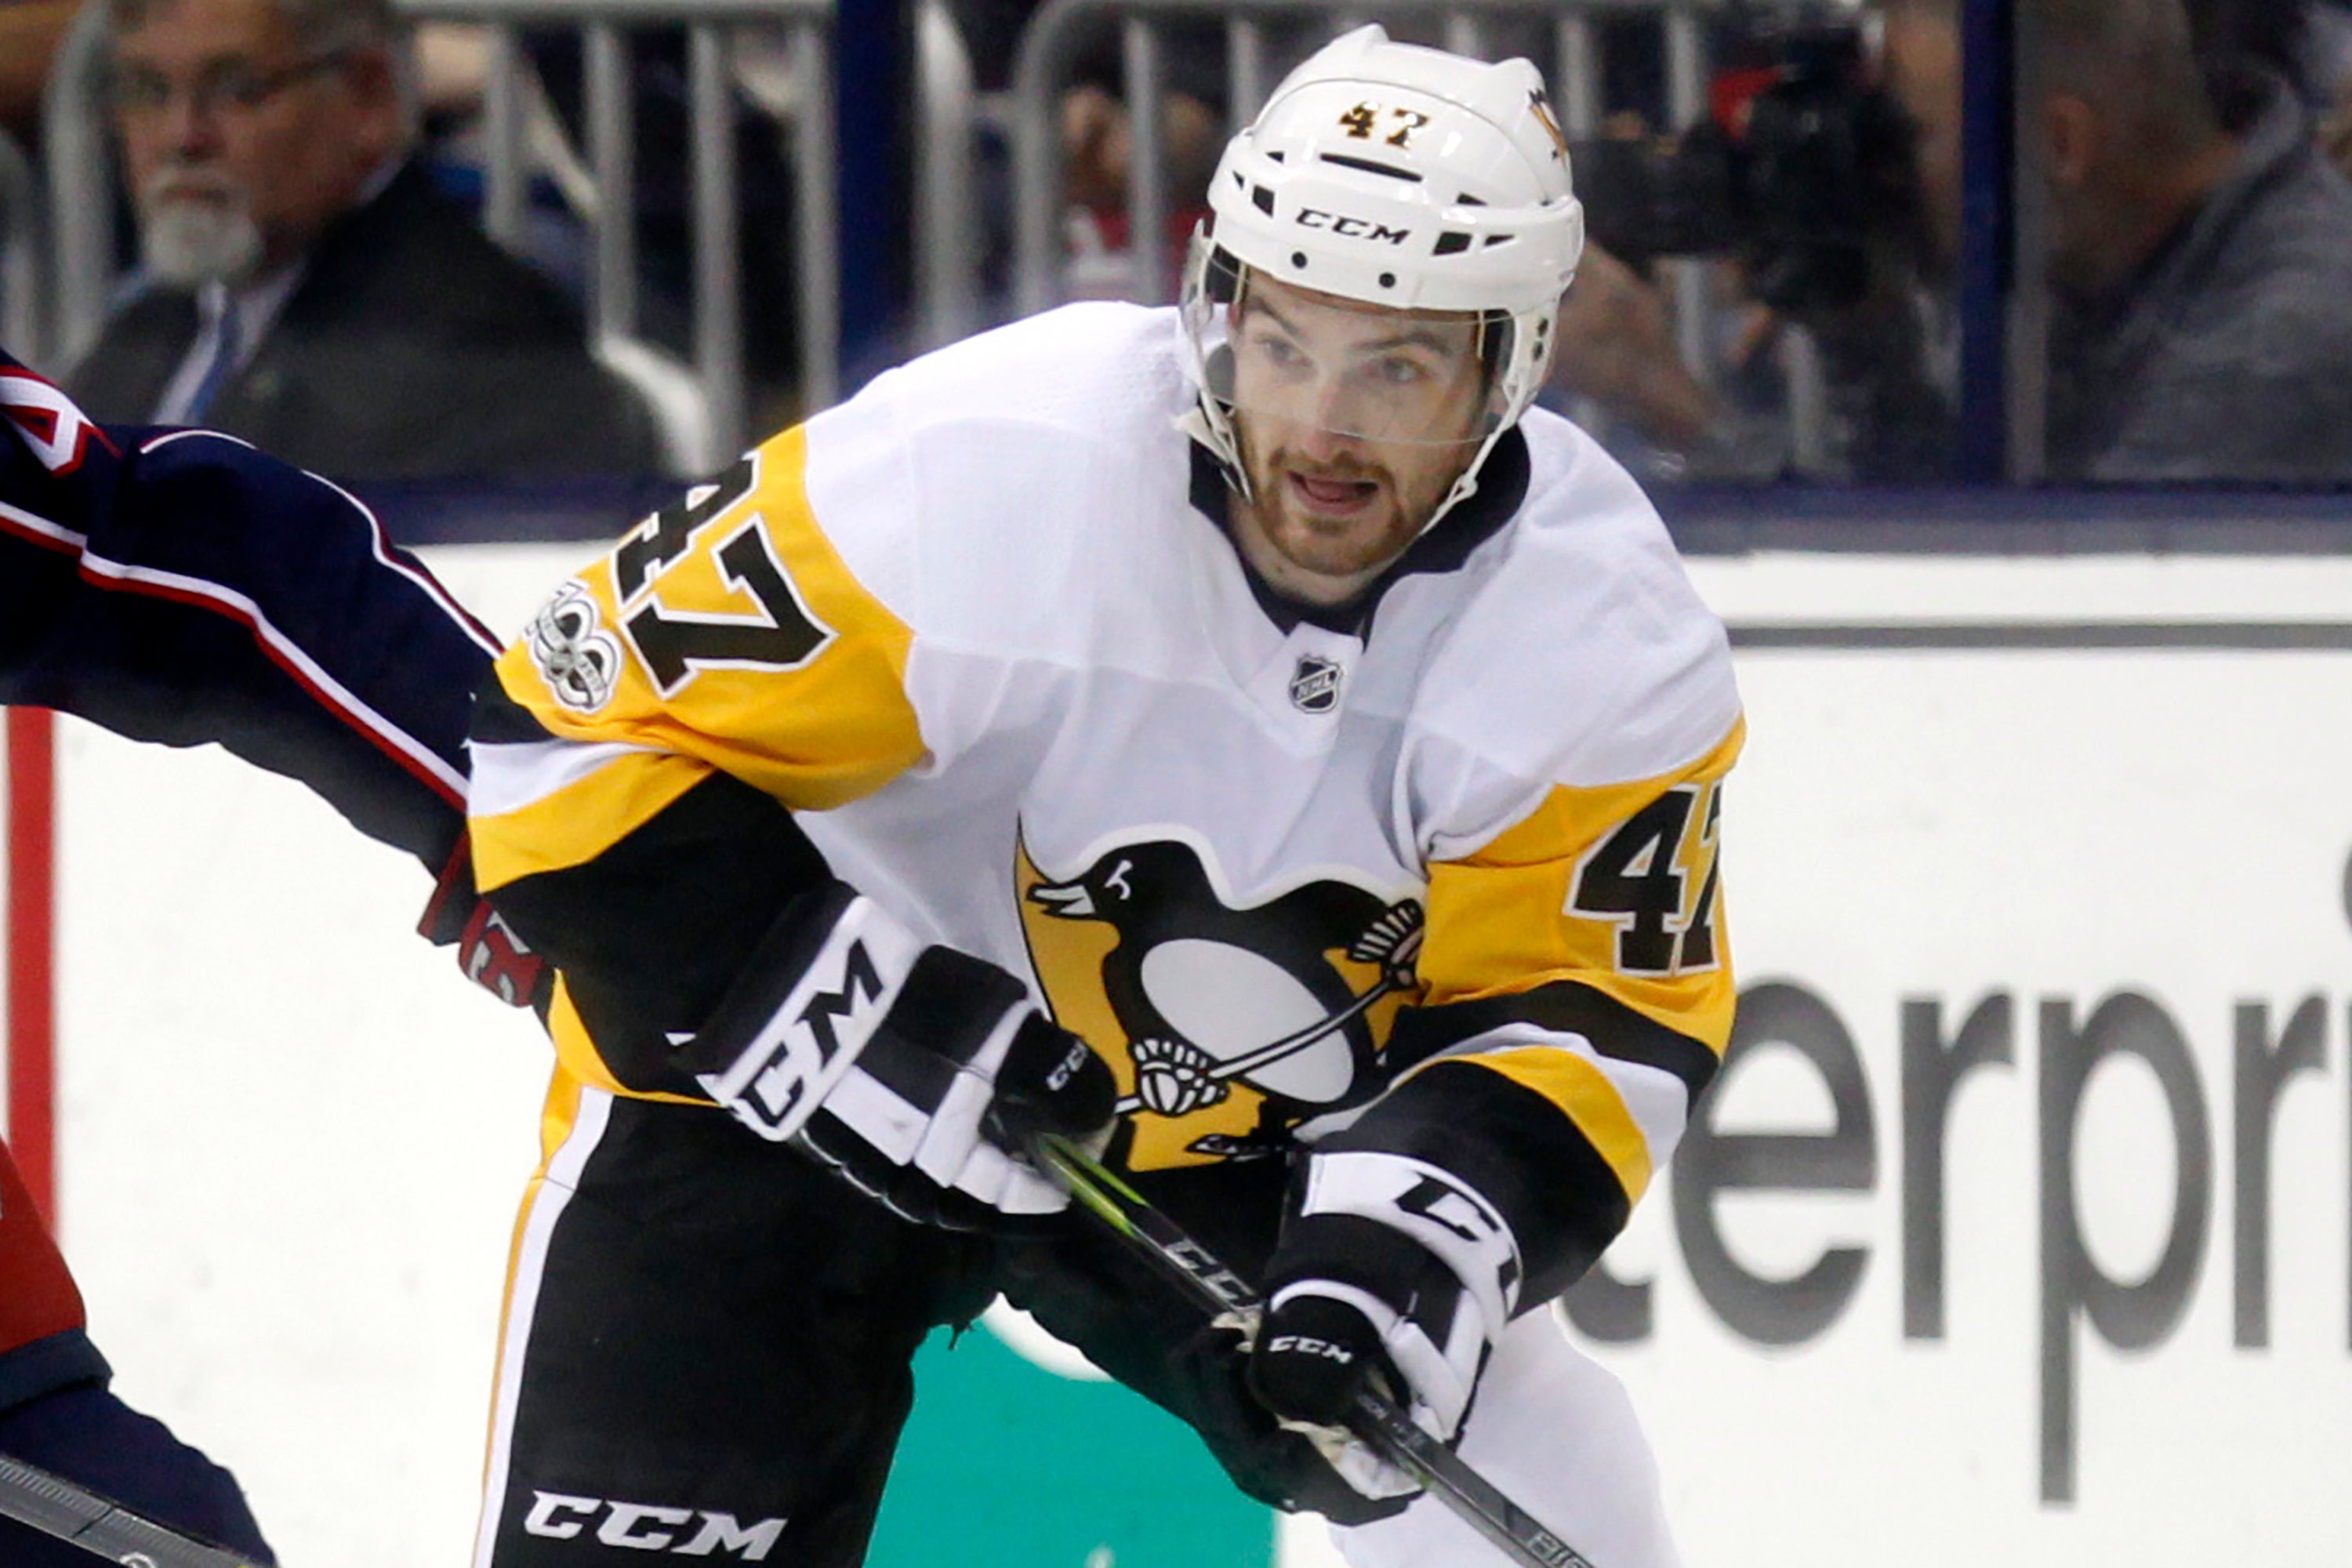 Pittsburgh Penguins forward Adam Johnson in action during an NHL hockey game in Ohio in 2017